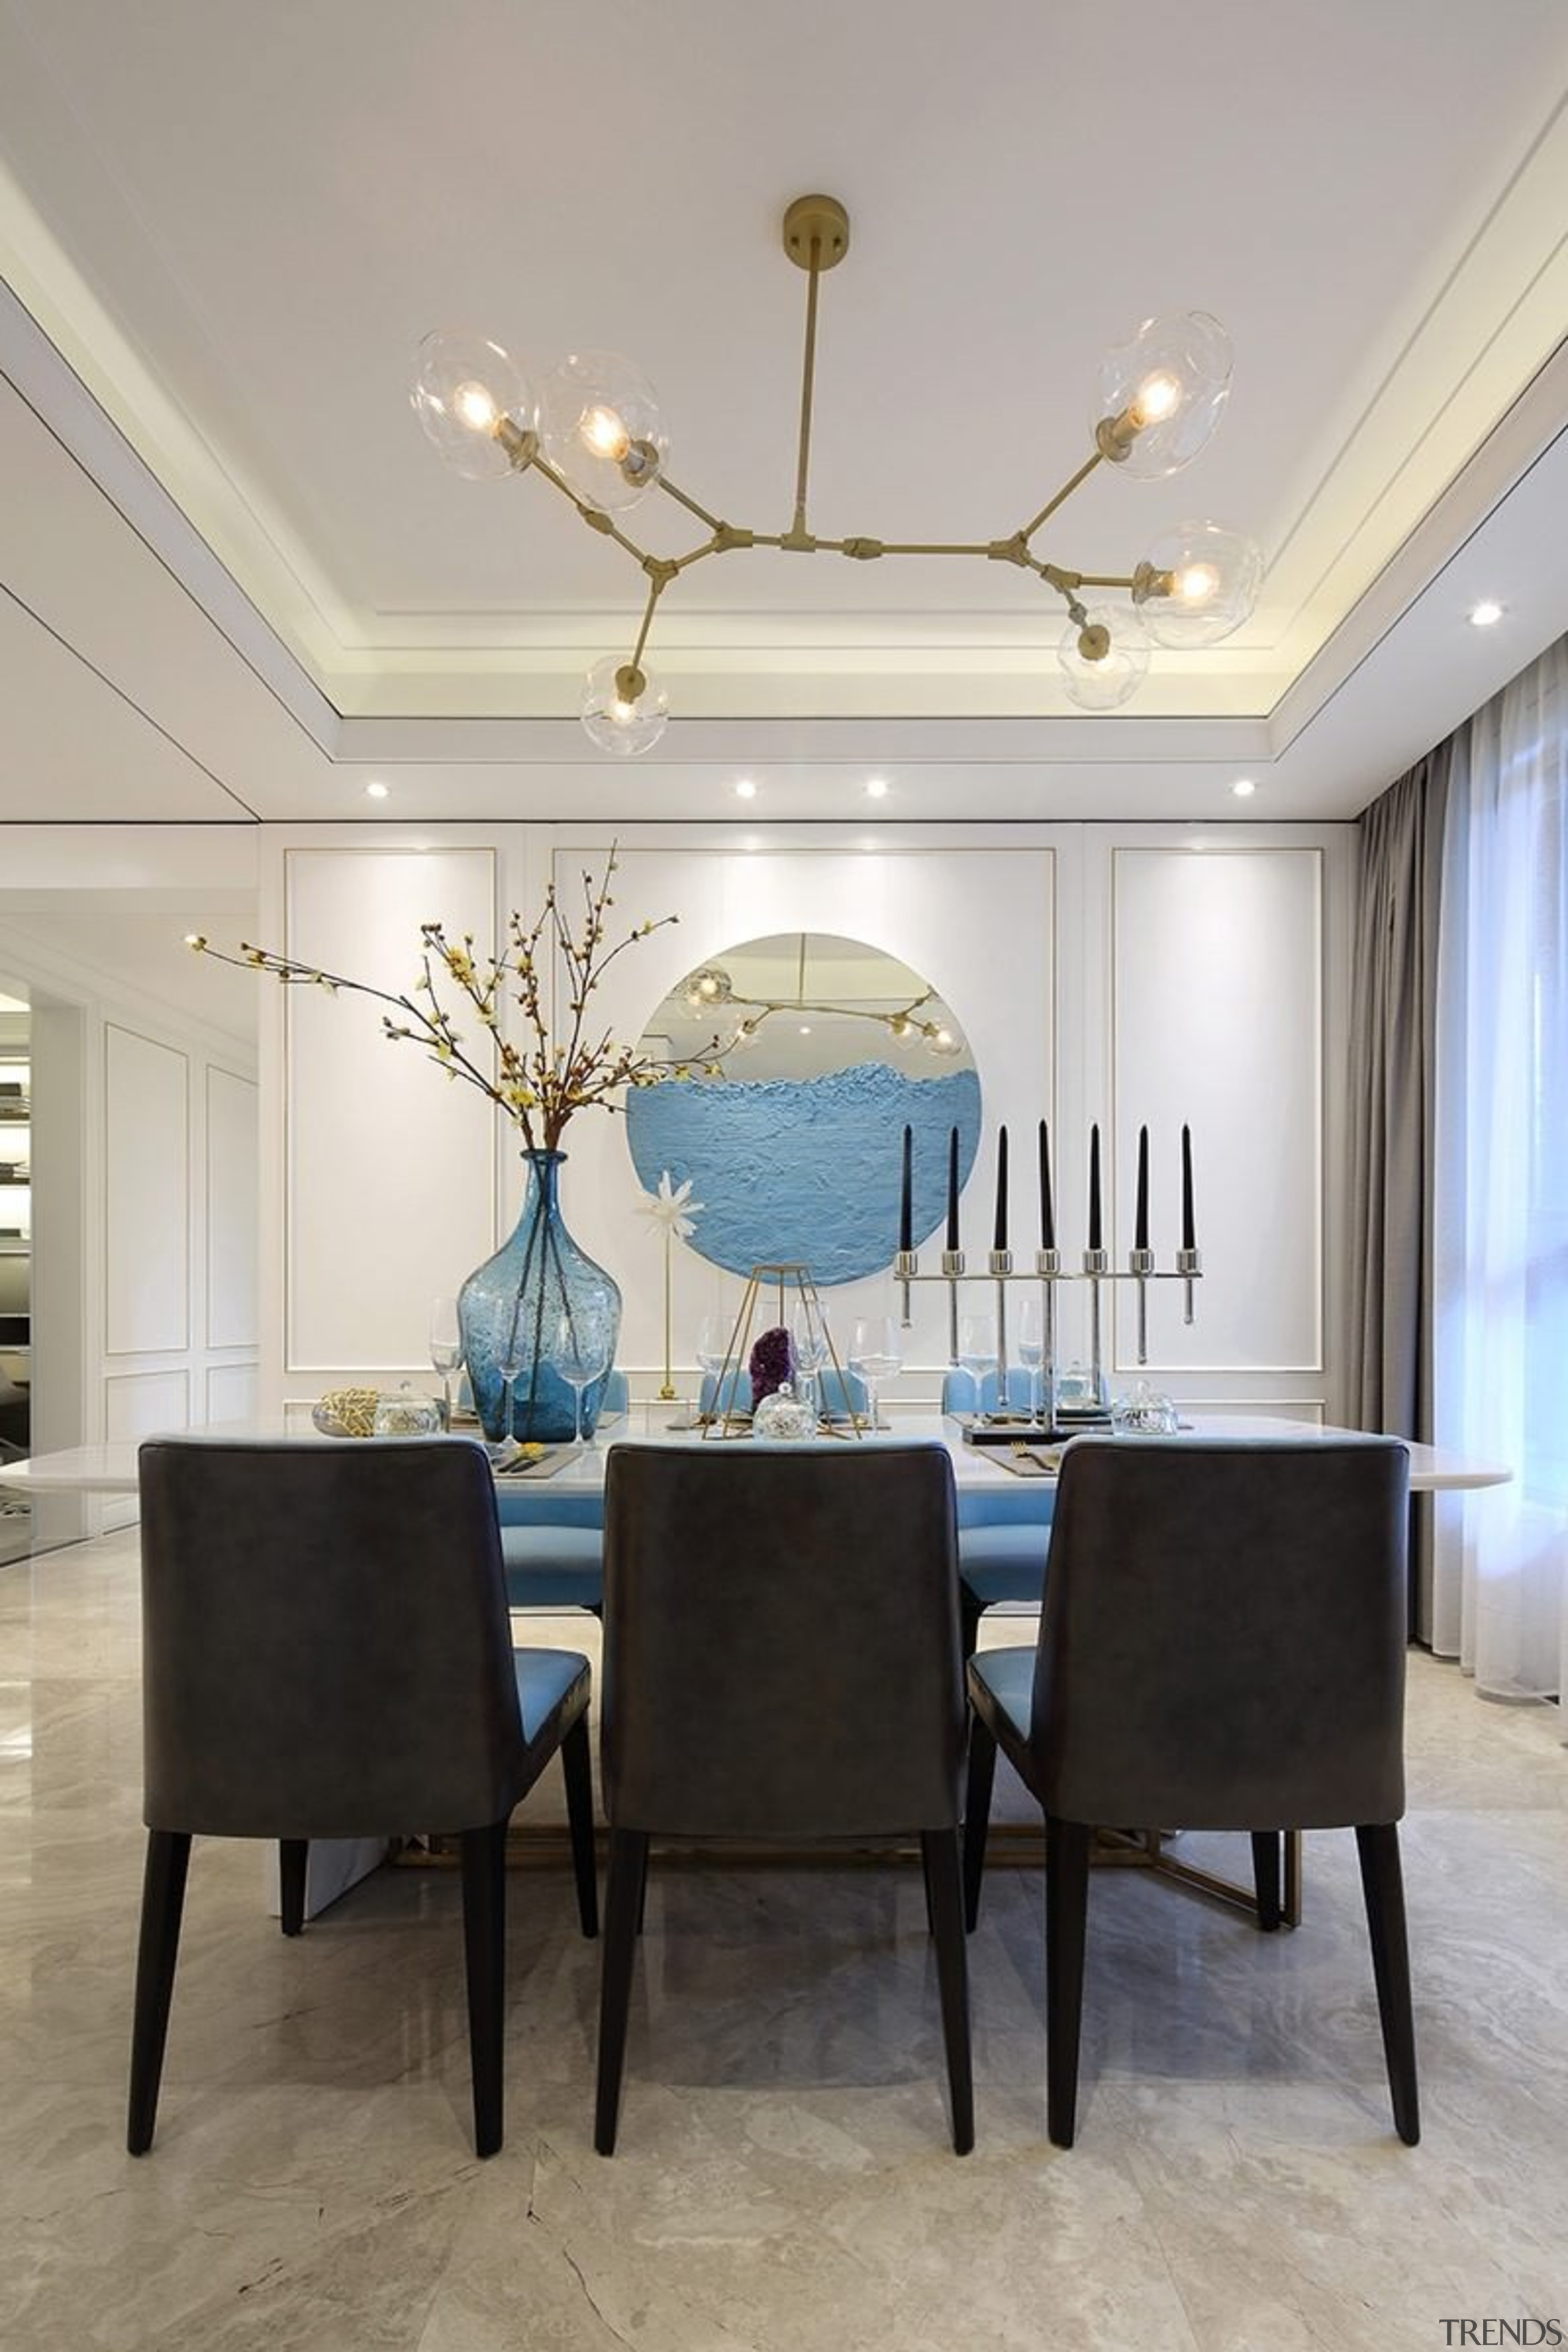 Designer: Li Jianmei Photography by Jianghe Architectural Photography ceiling, dining room, furniture, home, interior design, living room, room, table, wall, gray